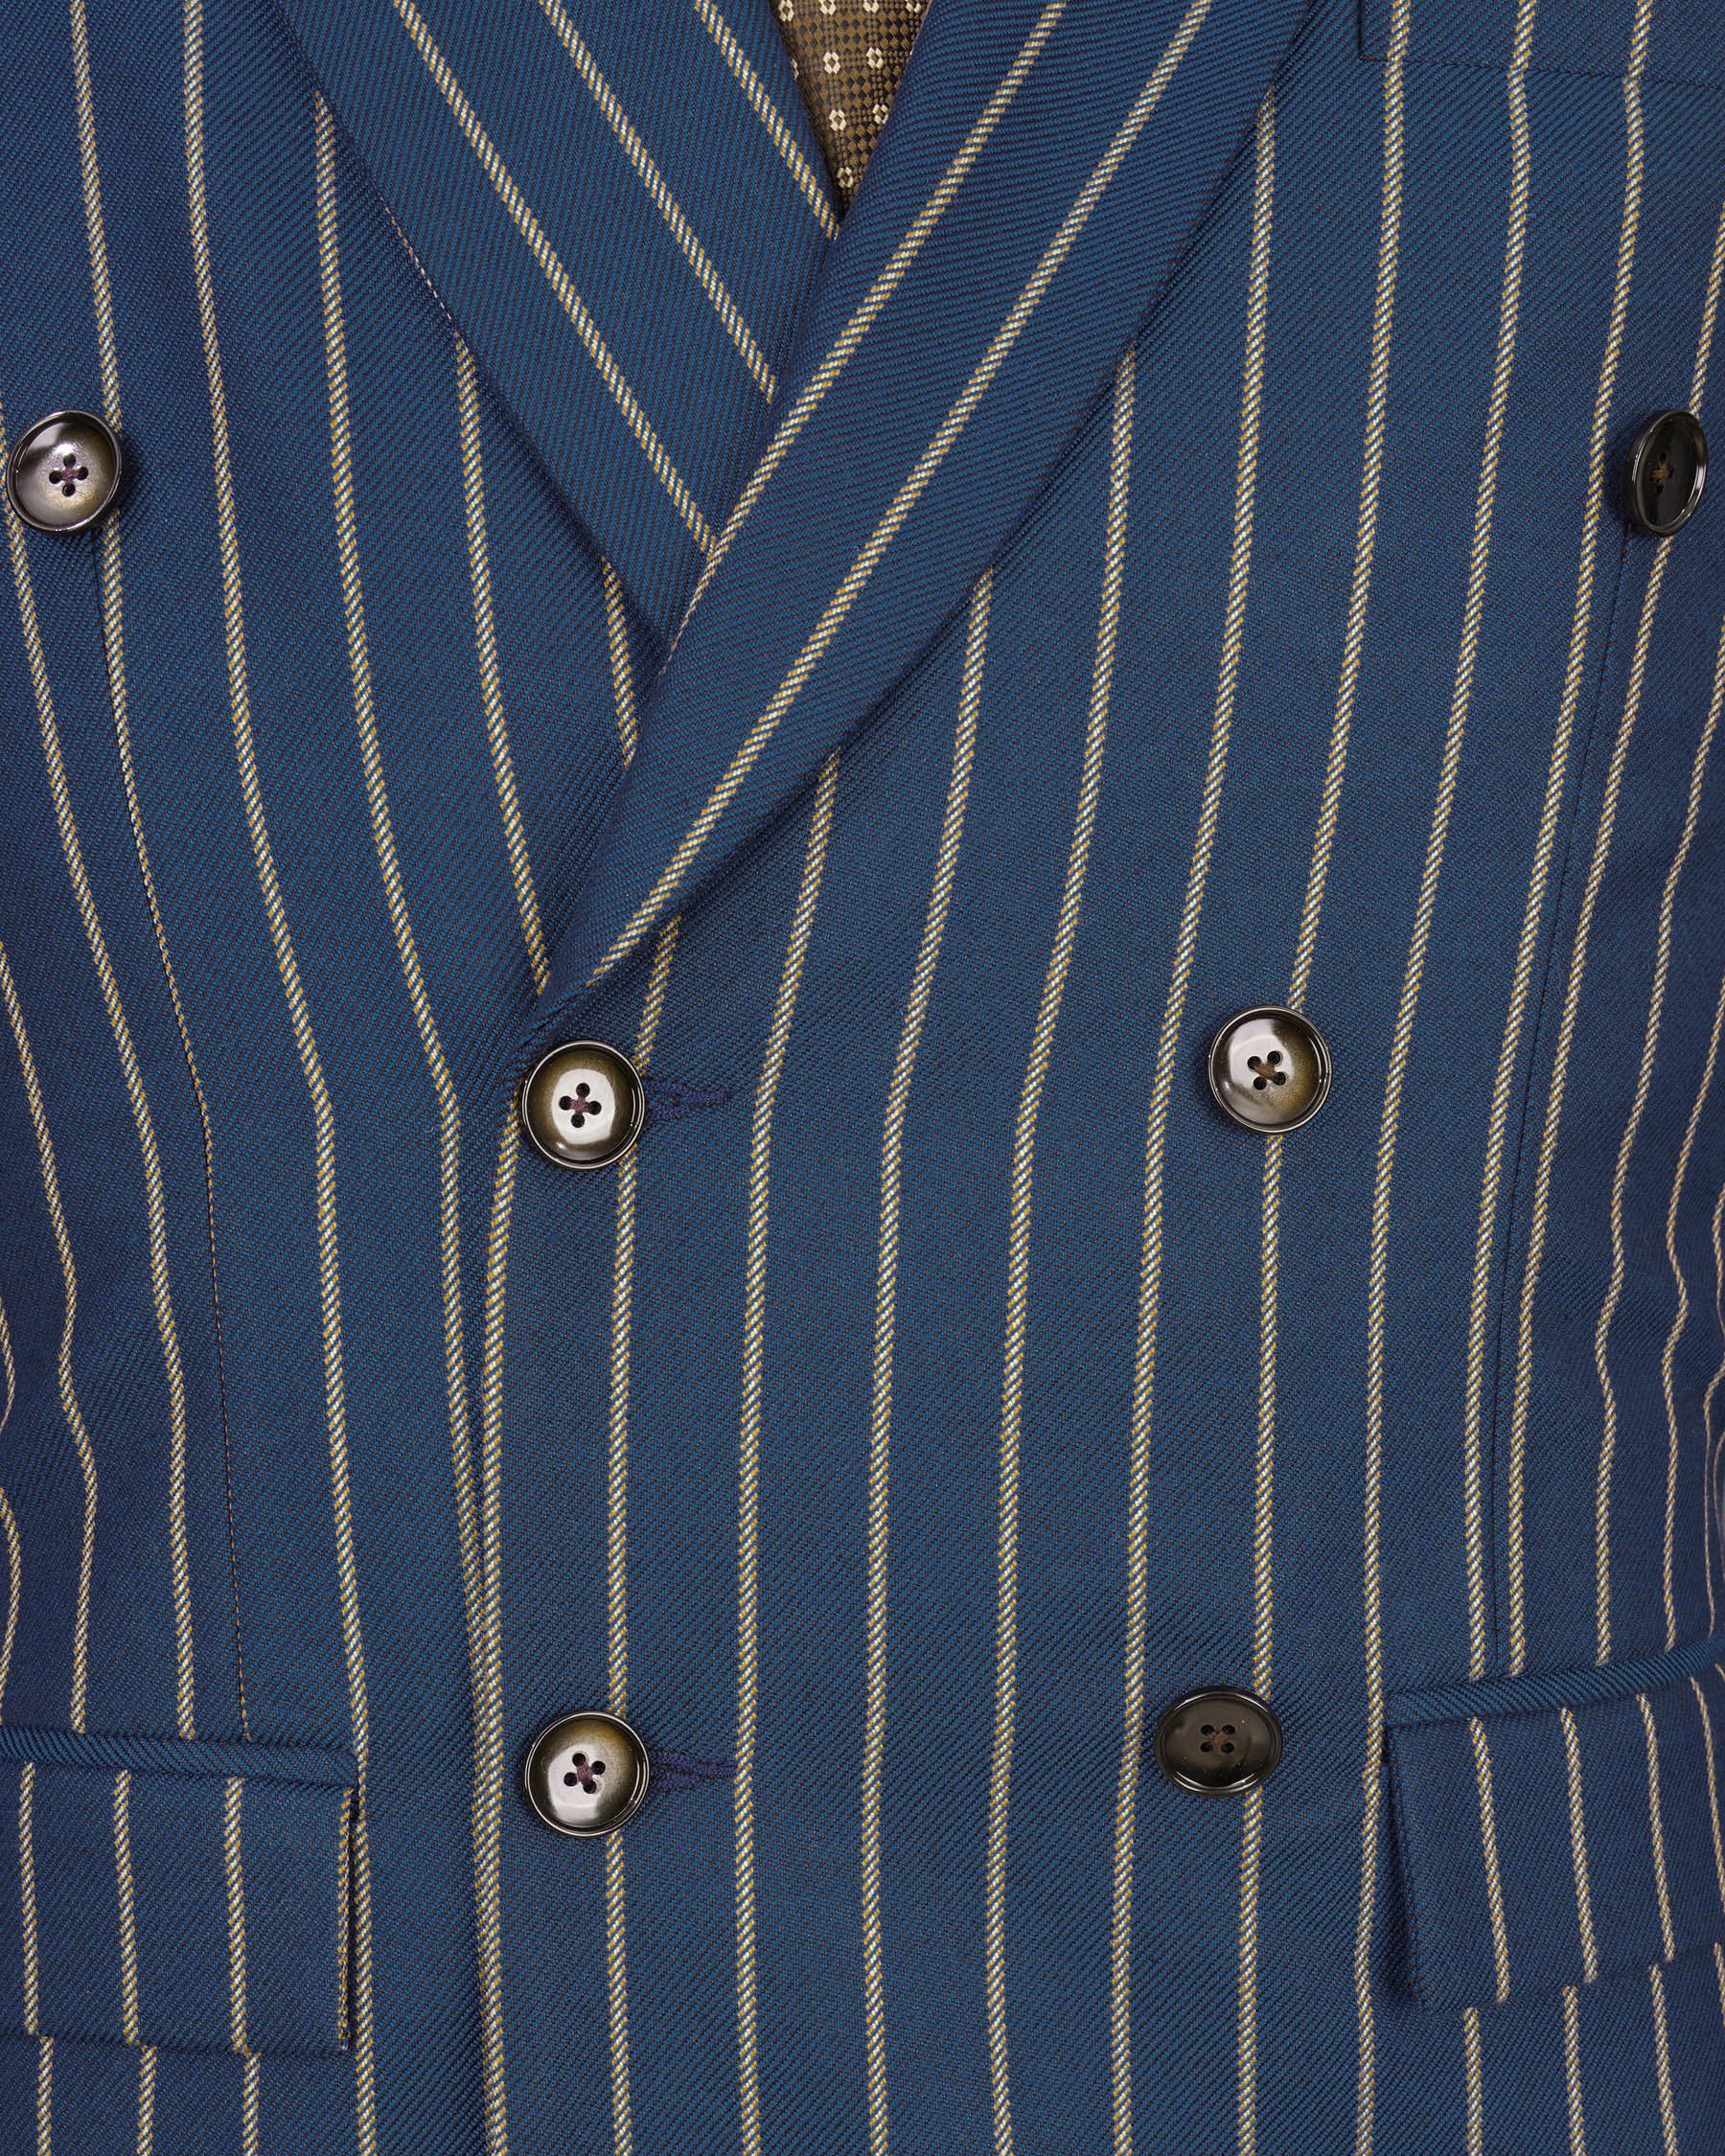 Limed Spruce Blue Striped Double Breasted Suit